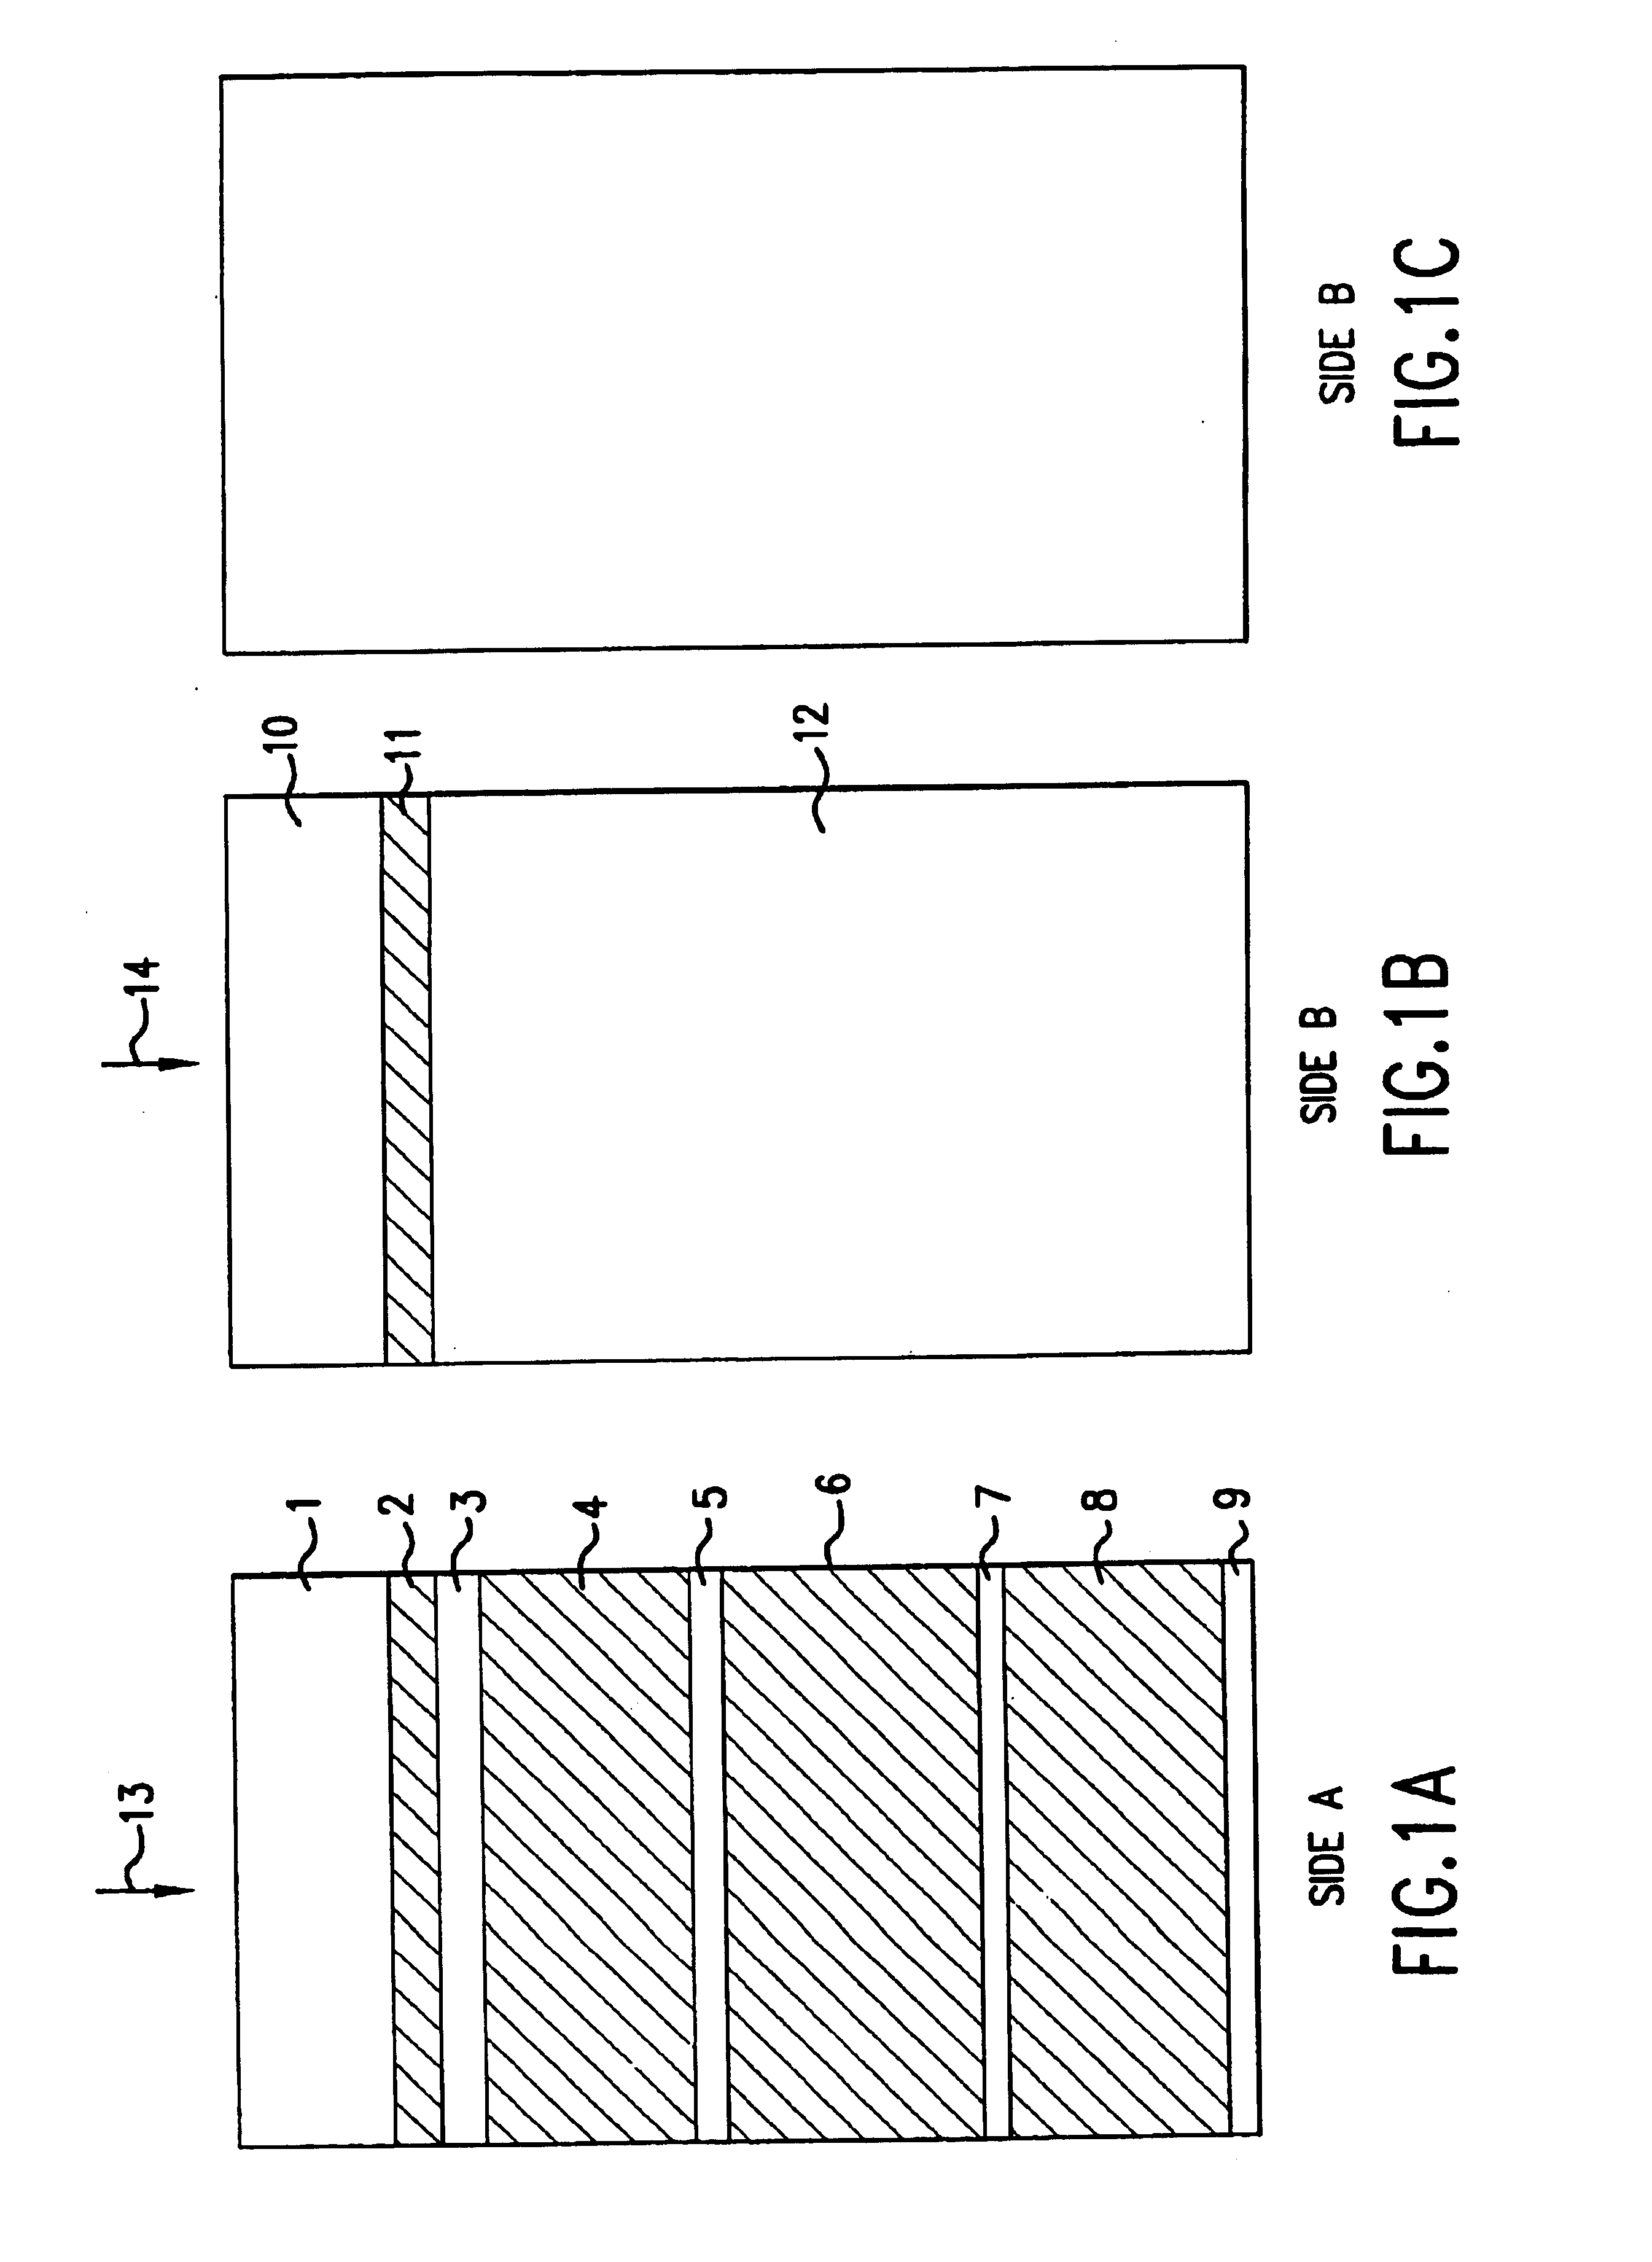 Catalytic combustor for a gas turbine